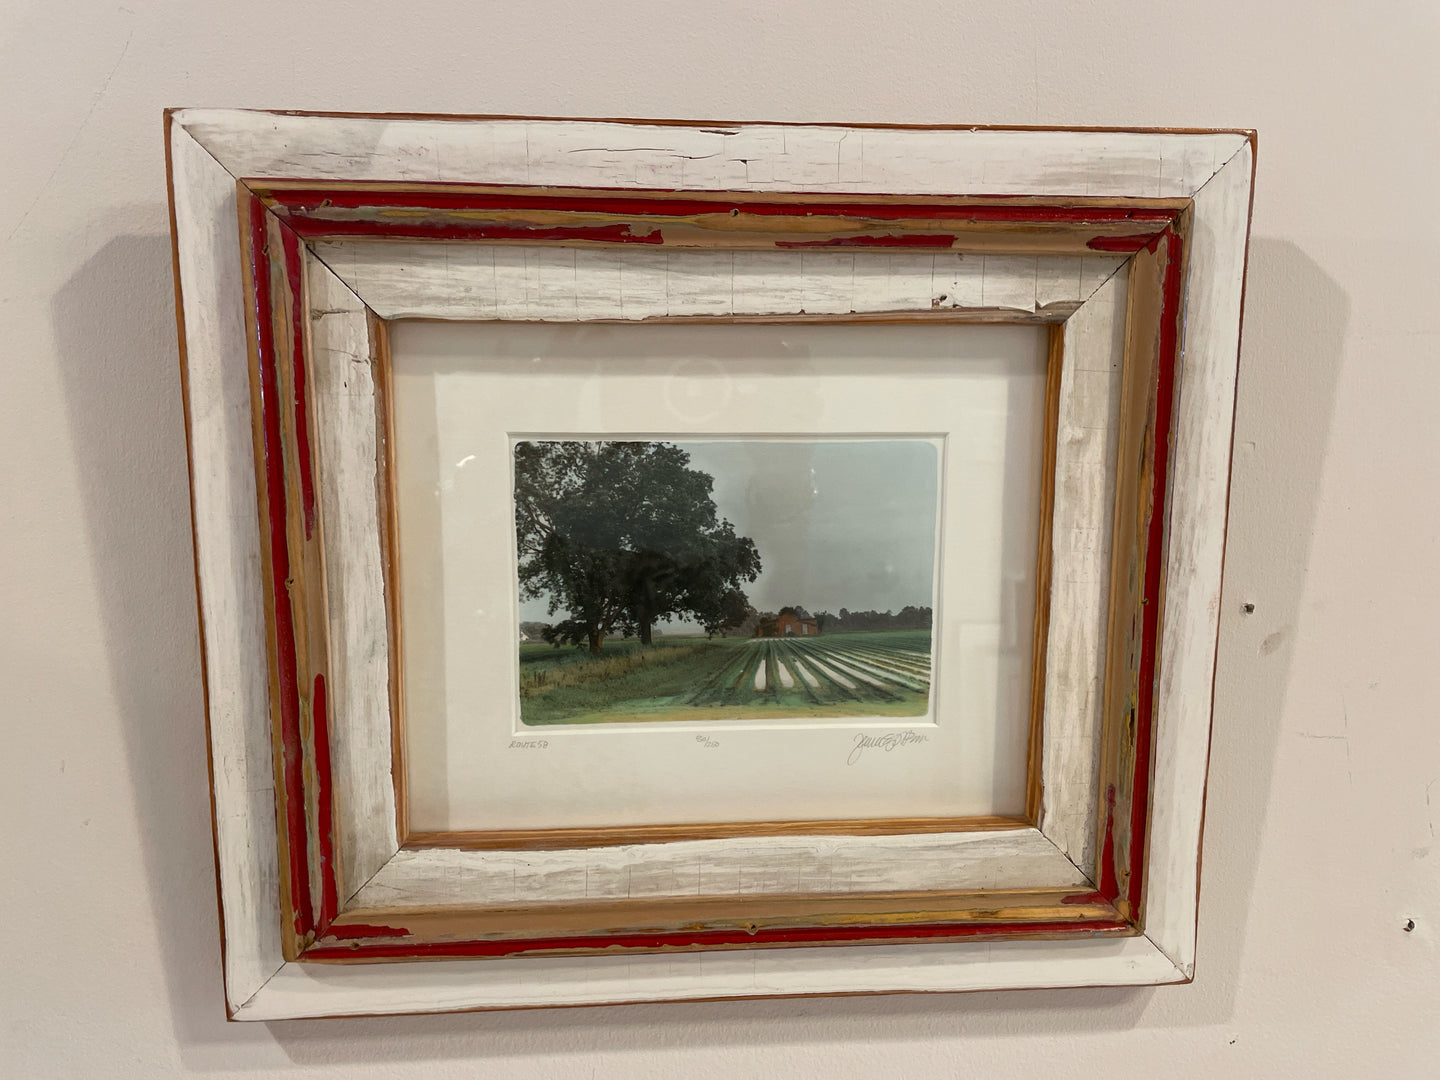 Photograph of Barn on Route 58 by Jana Epstein,  signed & numbered